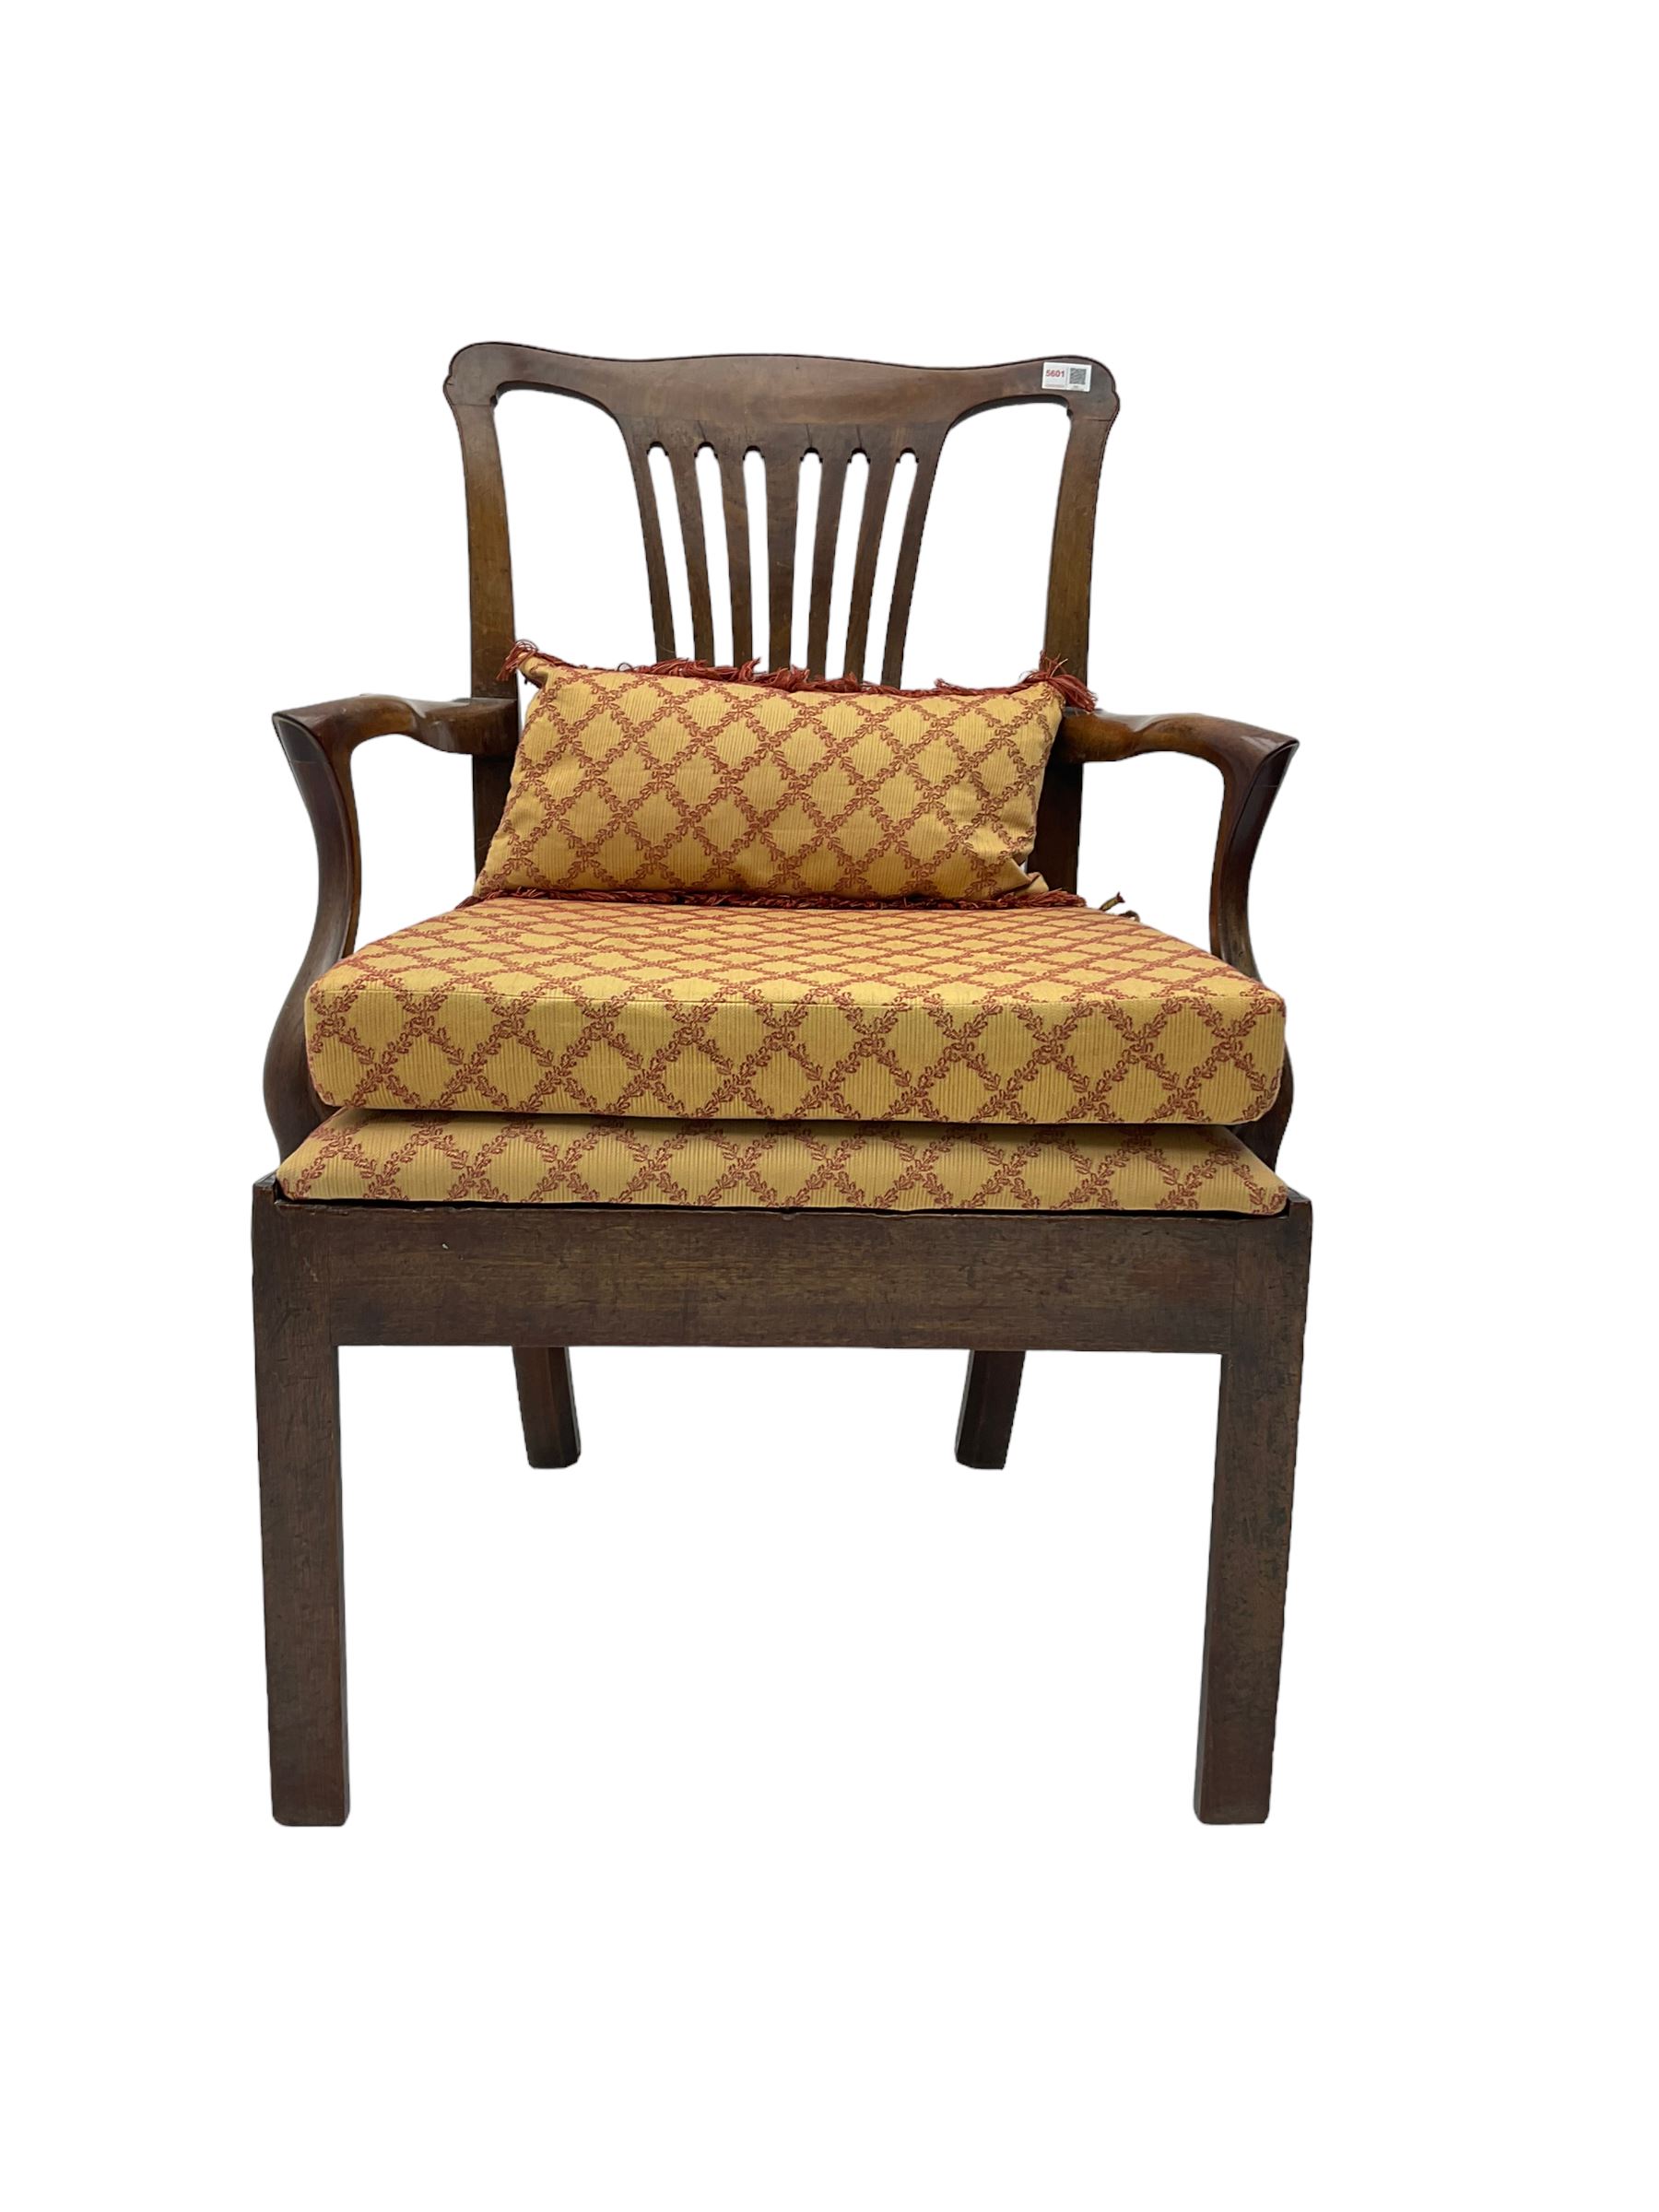 Chippendale design mahogany armchair - Image 2 of 2